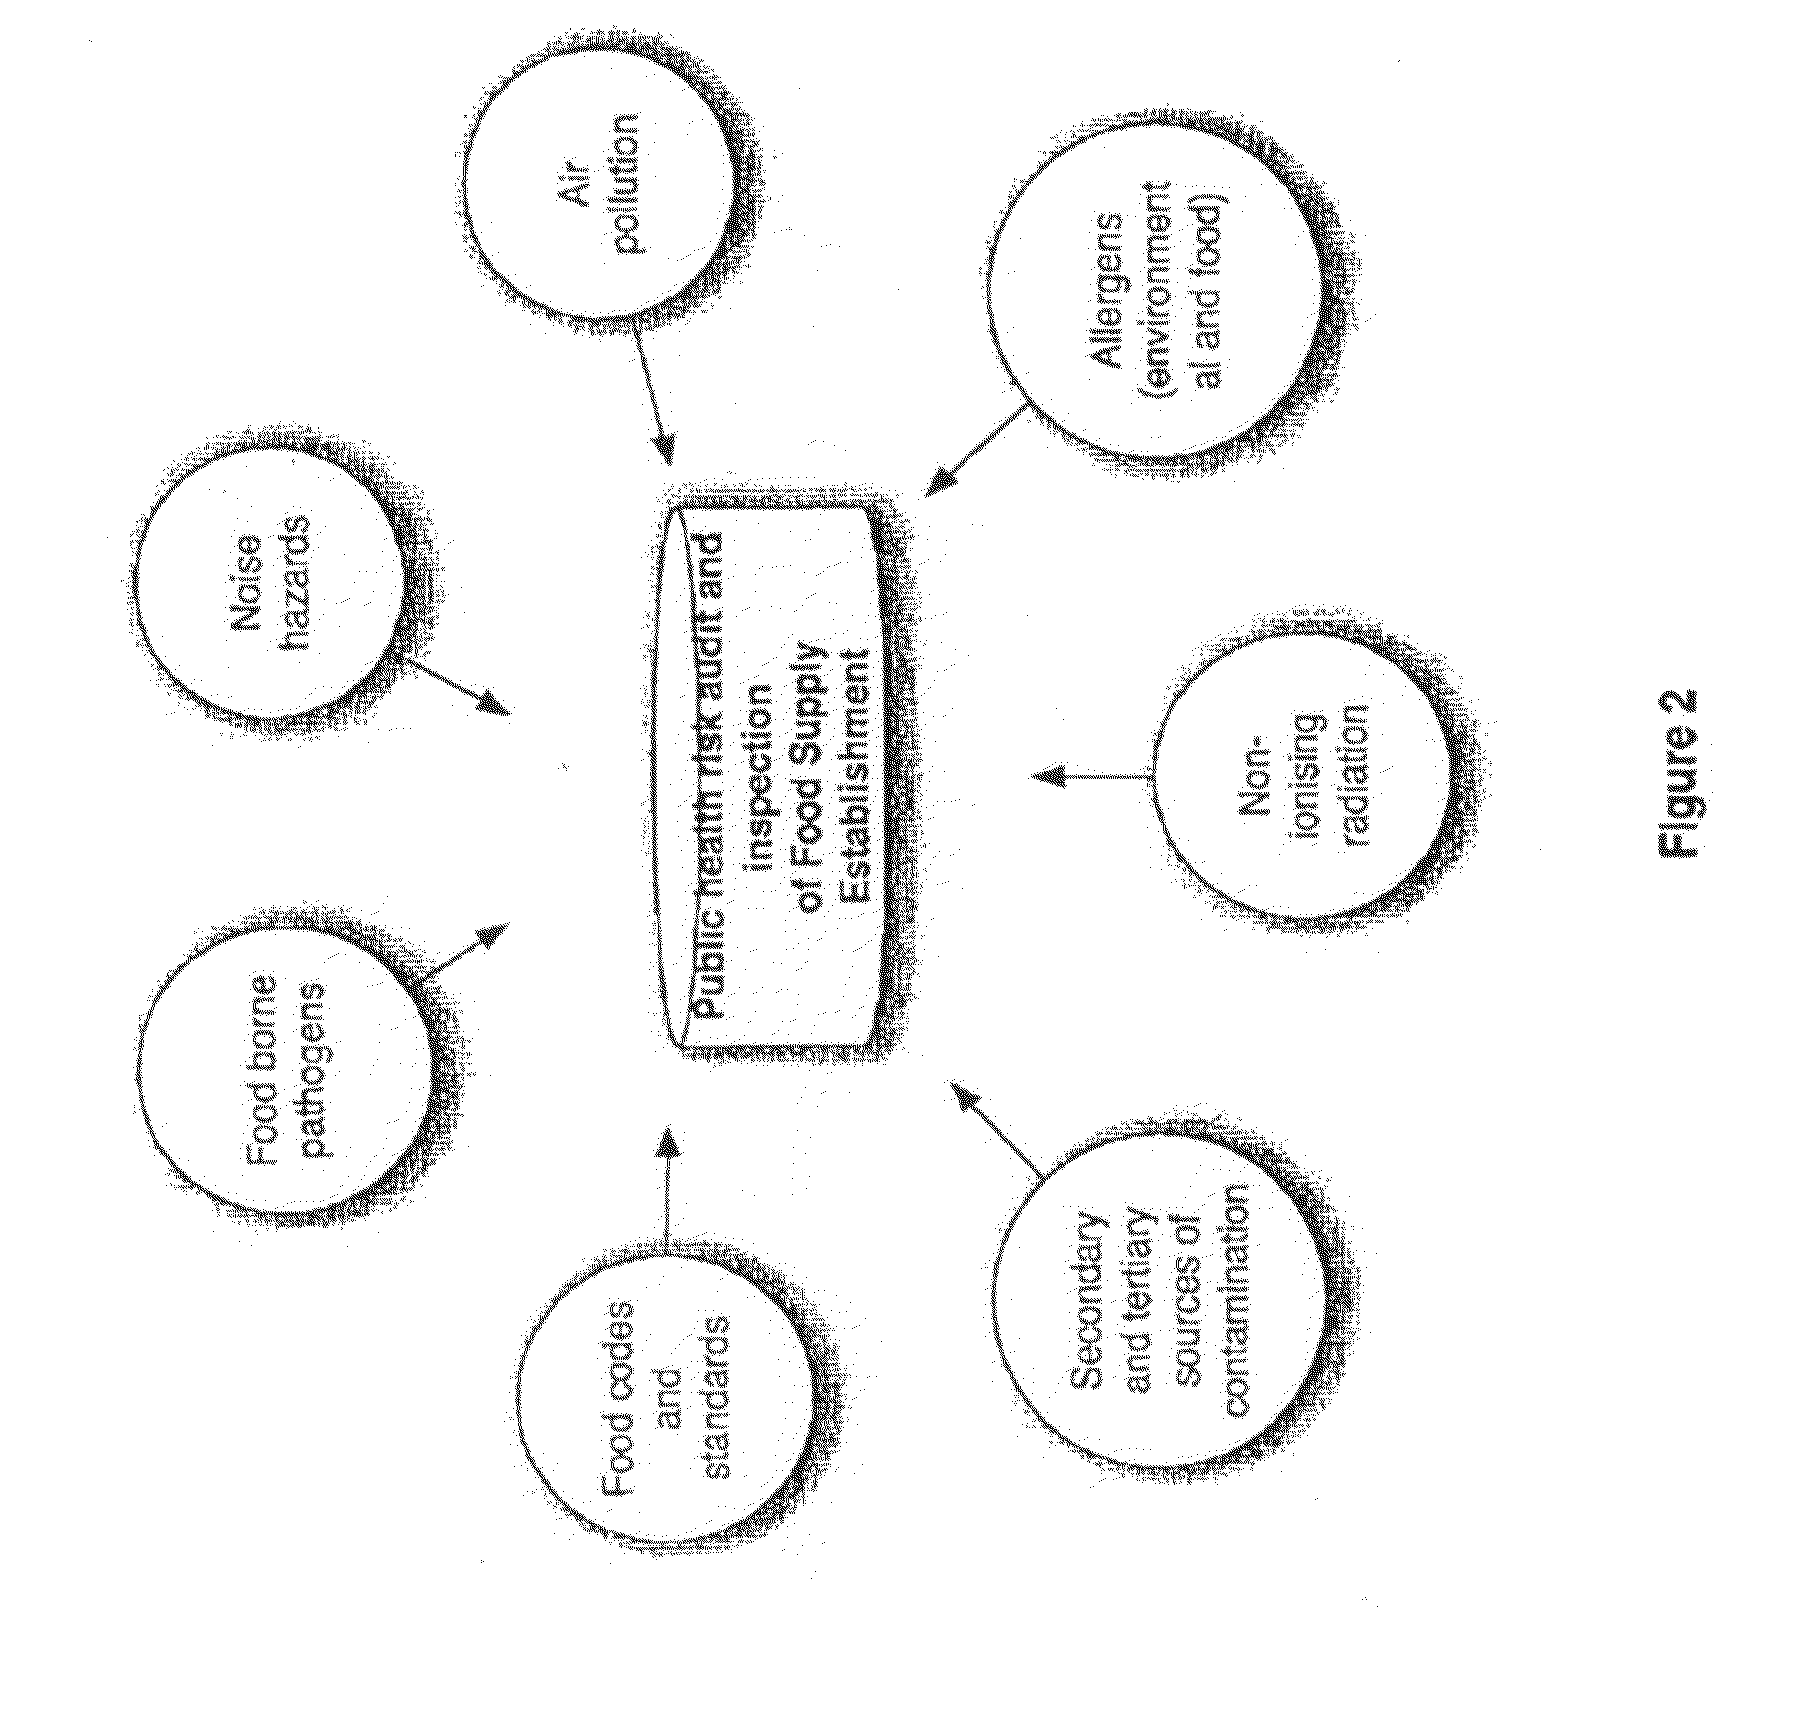 System, method and apparatus for rating risk